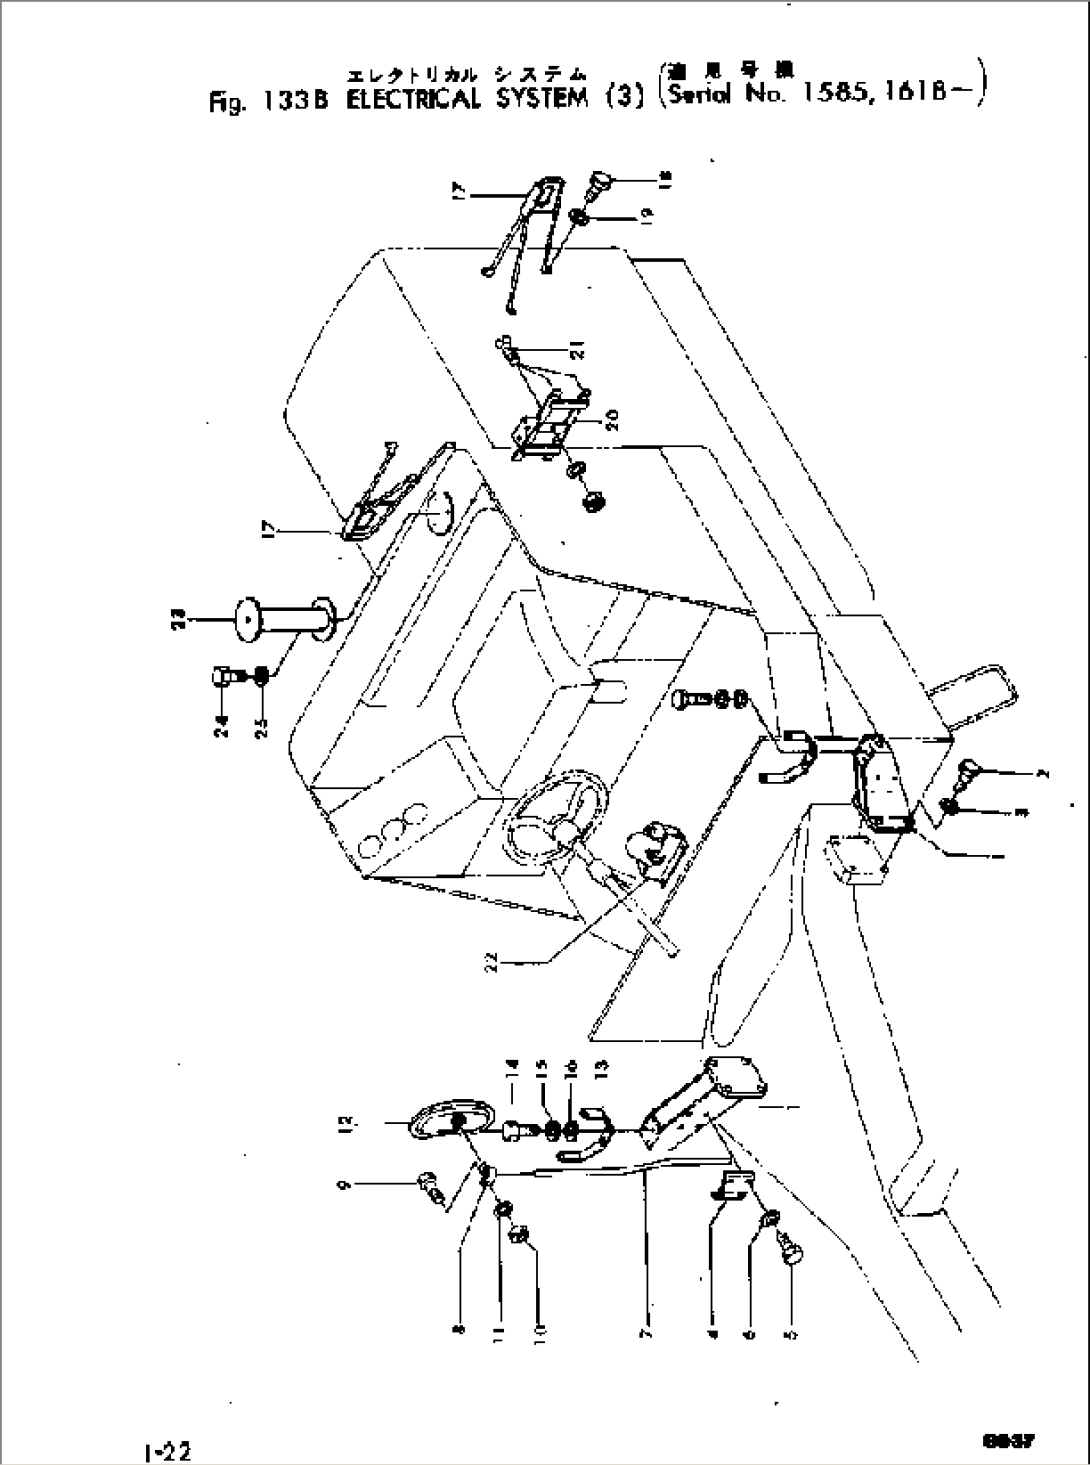 ELECTRICAL SYSTEM (3)(#1618-)